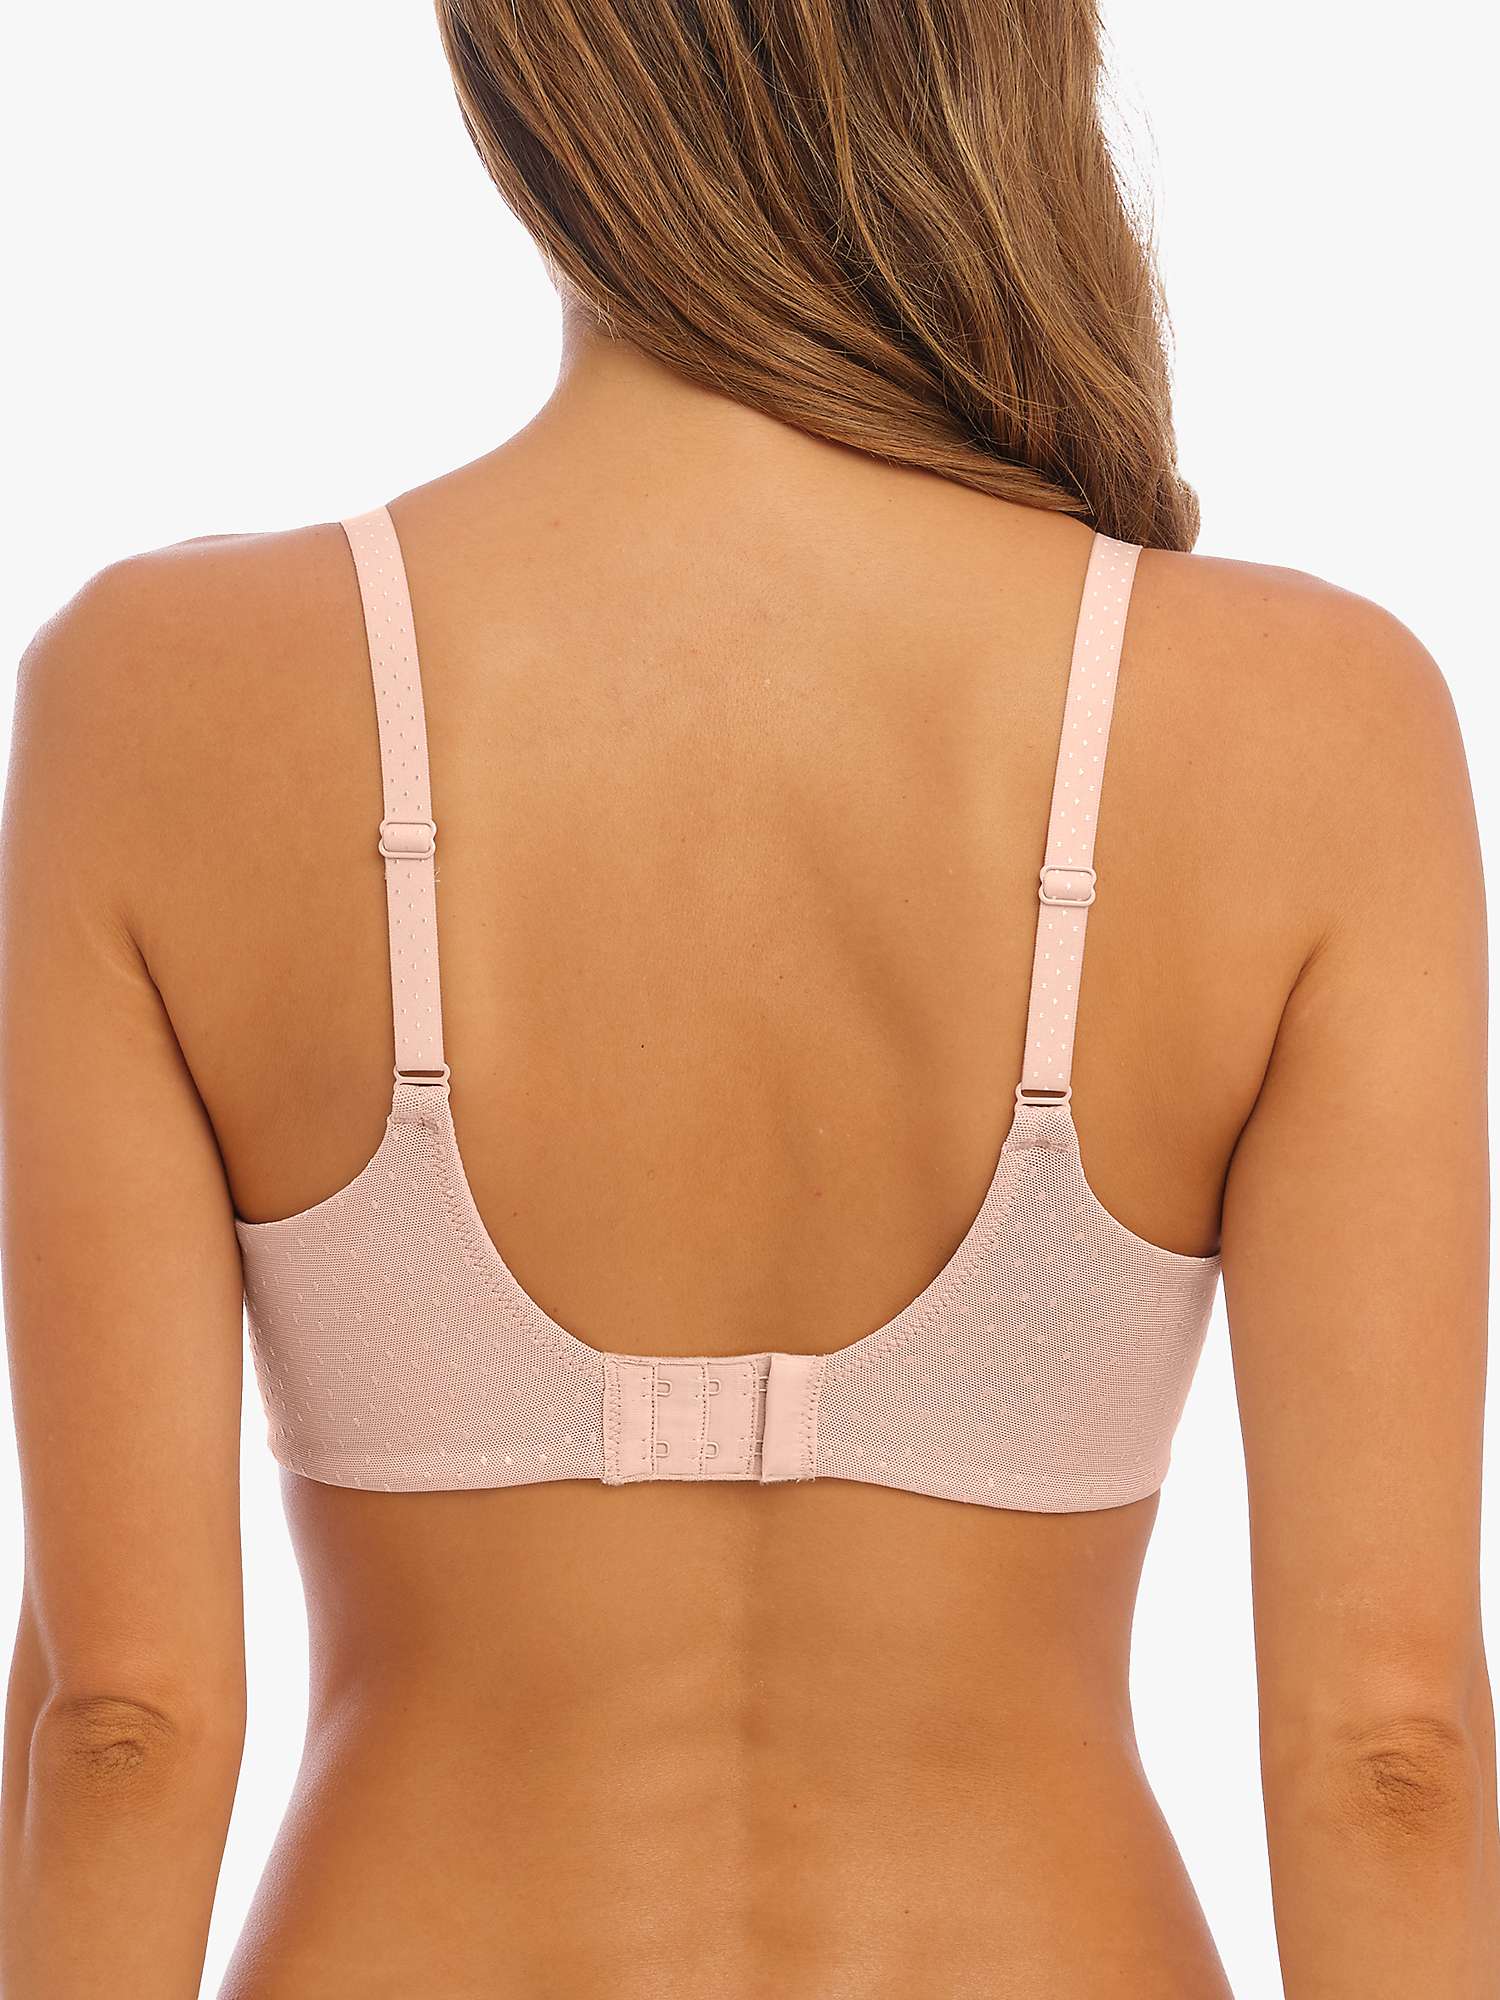 Buy Wacoal Back Appeal Smoothing Underwired Bra, Rose Dust Online at johnlewis.com